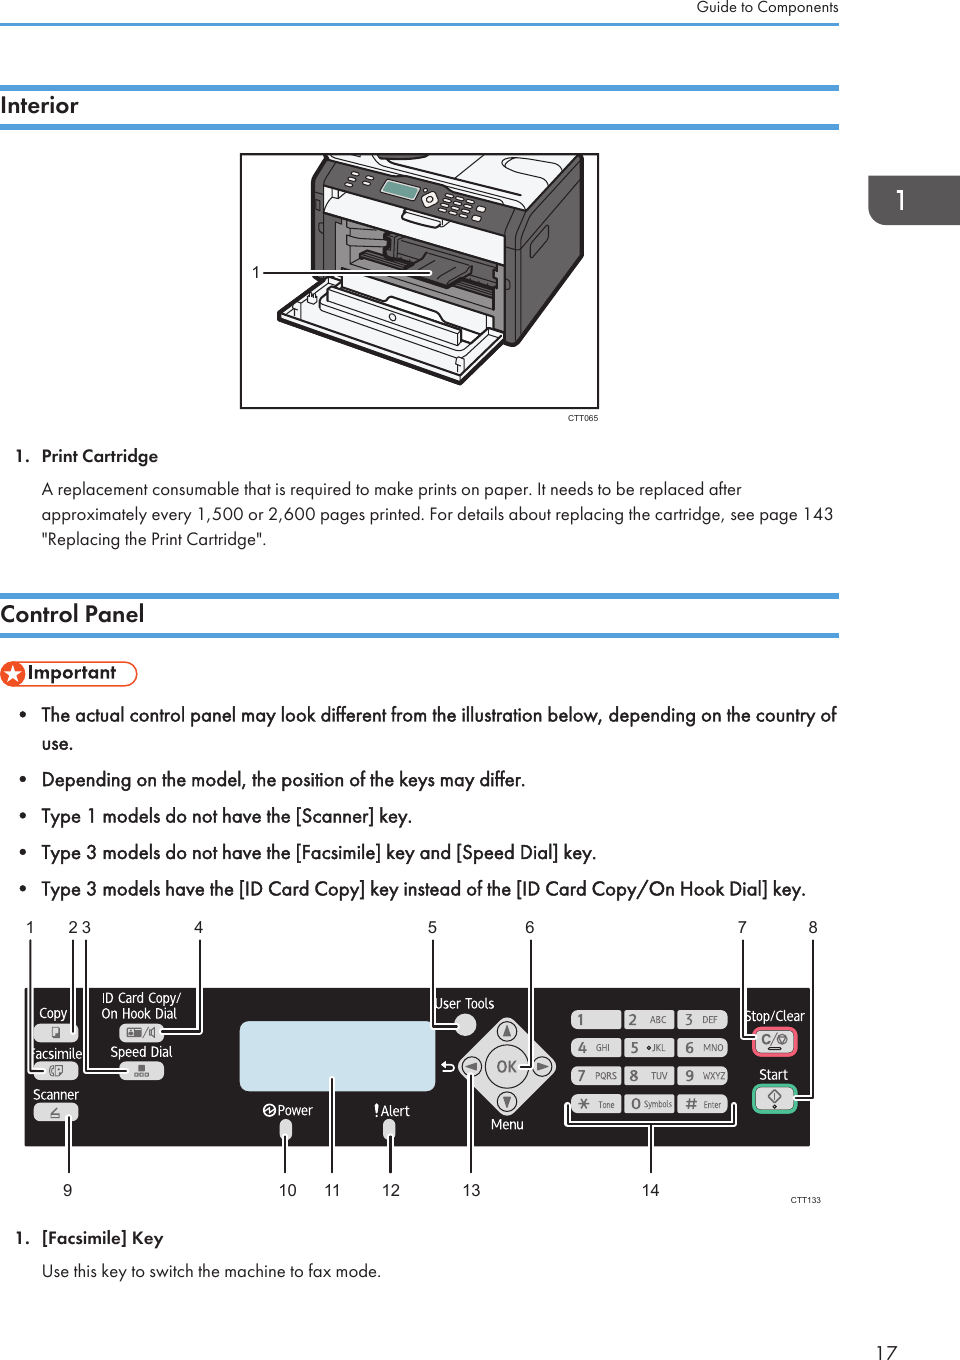 InteriorCTT06511. Print CartridgeA replacement consumable that is required to make prints on paper. It needs to be replaced afterapproximately every 1,500 or 2,600 pages printed. For details about replacing the cartridge, see page 143&quot;Replacing the Print Cartridge&quot;.Control Panel• The actual control panel may look different from the illustration below, depending on the country ofuse.• Depending on the model, the position of the keys may differ.• Type 1 models do not have the [Scanner] key.• Type 3 models do not have the [Facsimile] key and [Speed Dial] key.• Type 3 models have the [ID Card Copy] key instead of the [ID Card Copy/On Hook Dial] key.123 4 5 6 7 891011121314CTT1331. [Facsimile] KeyUse this key to switch the machine to fax mode.Guide to Components17